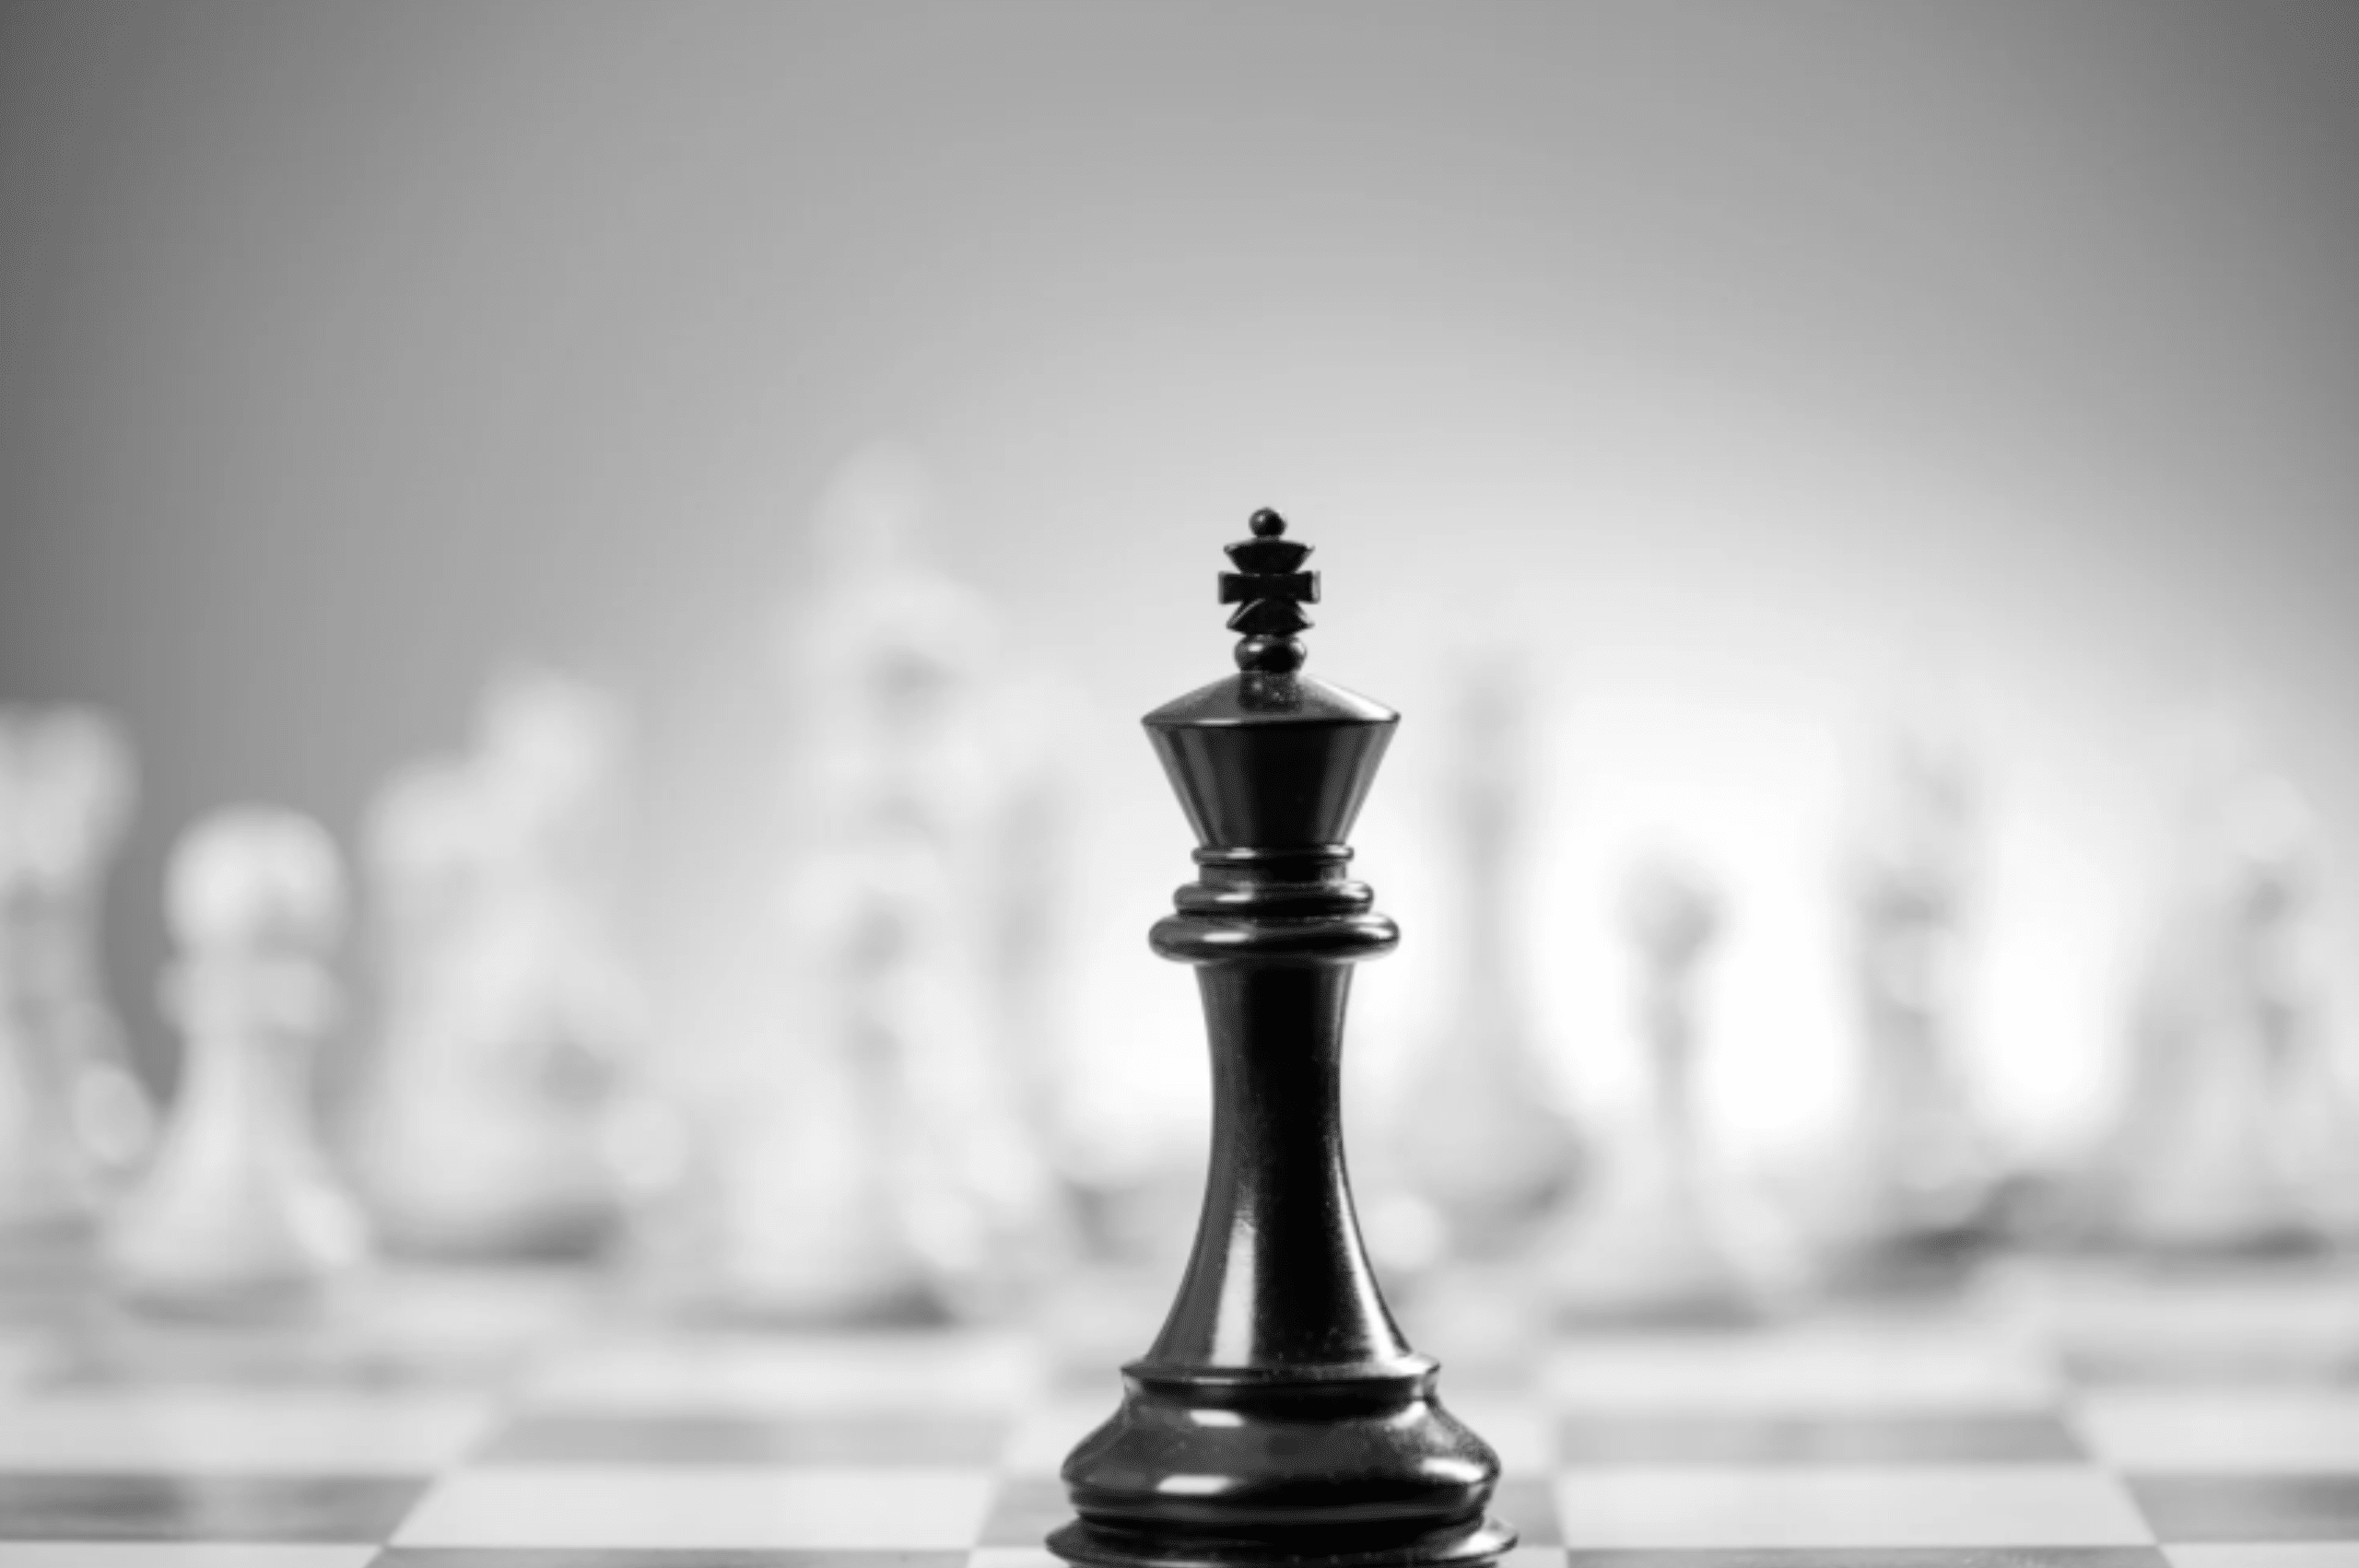 Black chess piece in front of blurred white chess pieces on chess board with gray chess board